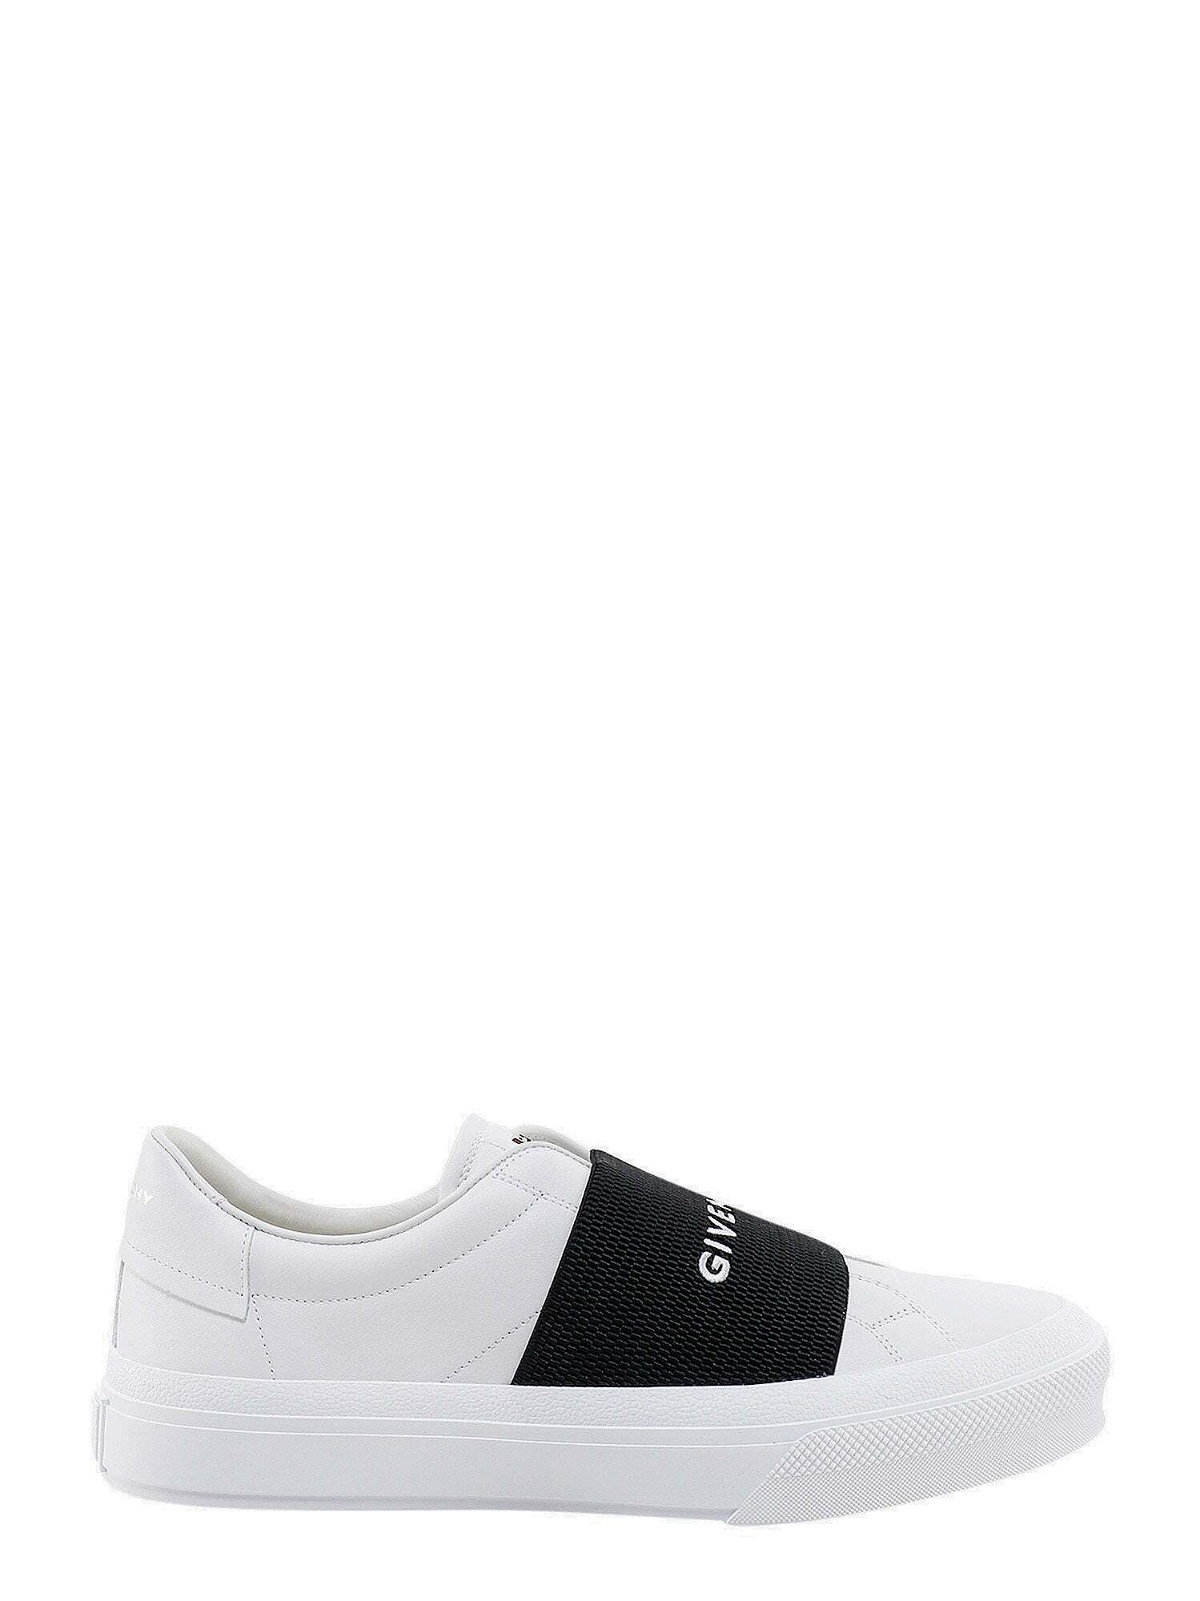 Givenchy Sneakers White Mens Givenchy